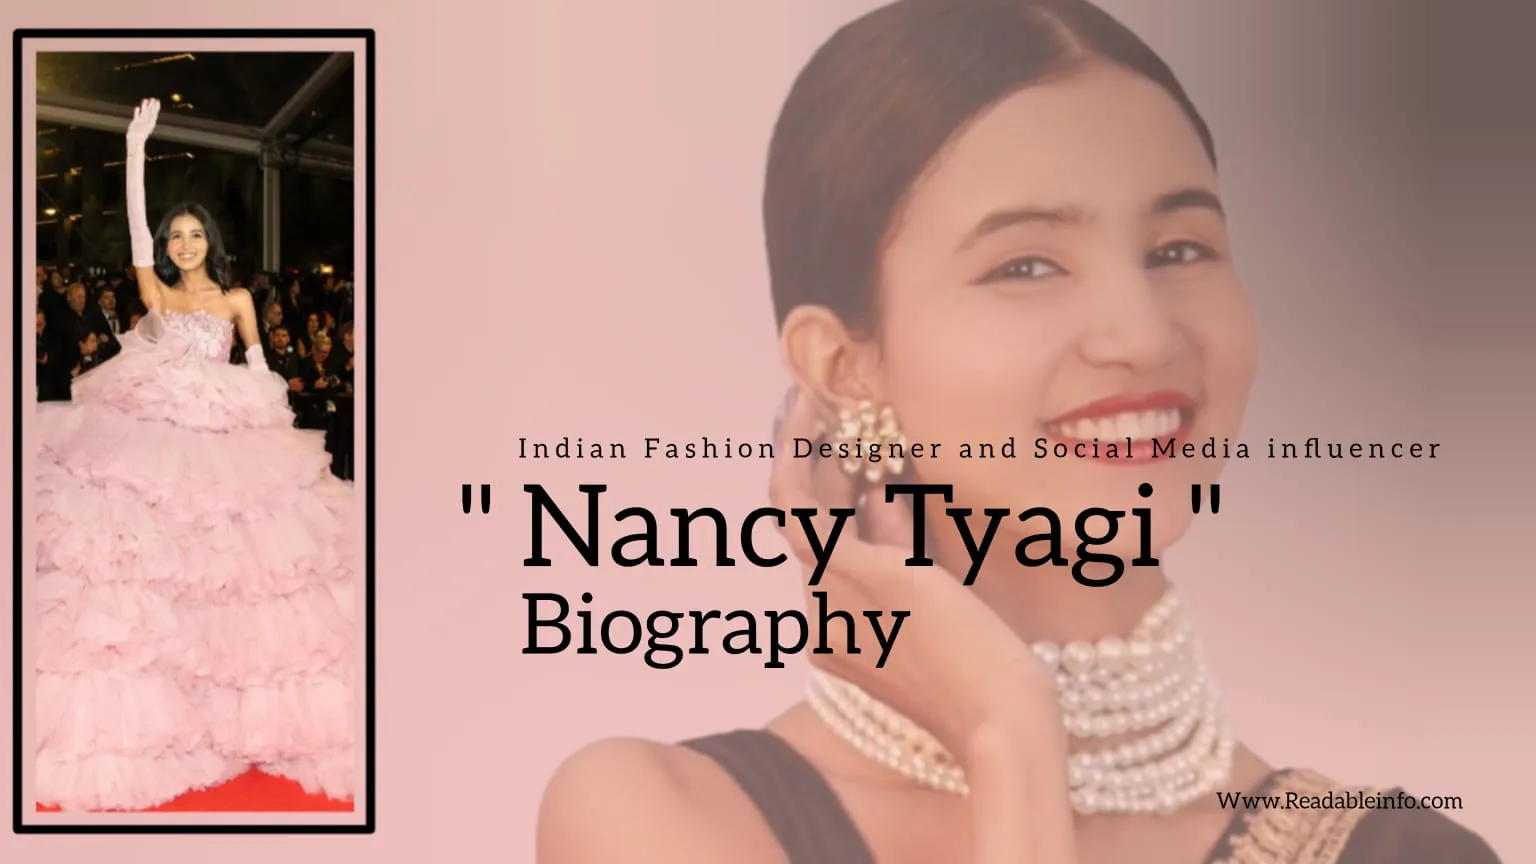 You are currently viewing Nancy Tyagi Biography (Indian Fashion Designer and Social Media Influencer)